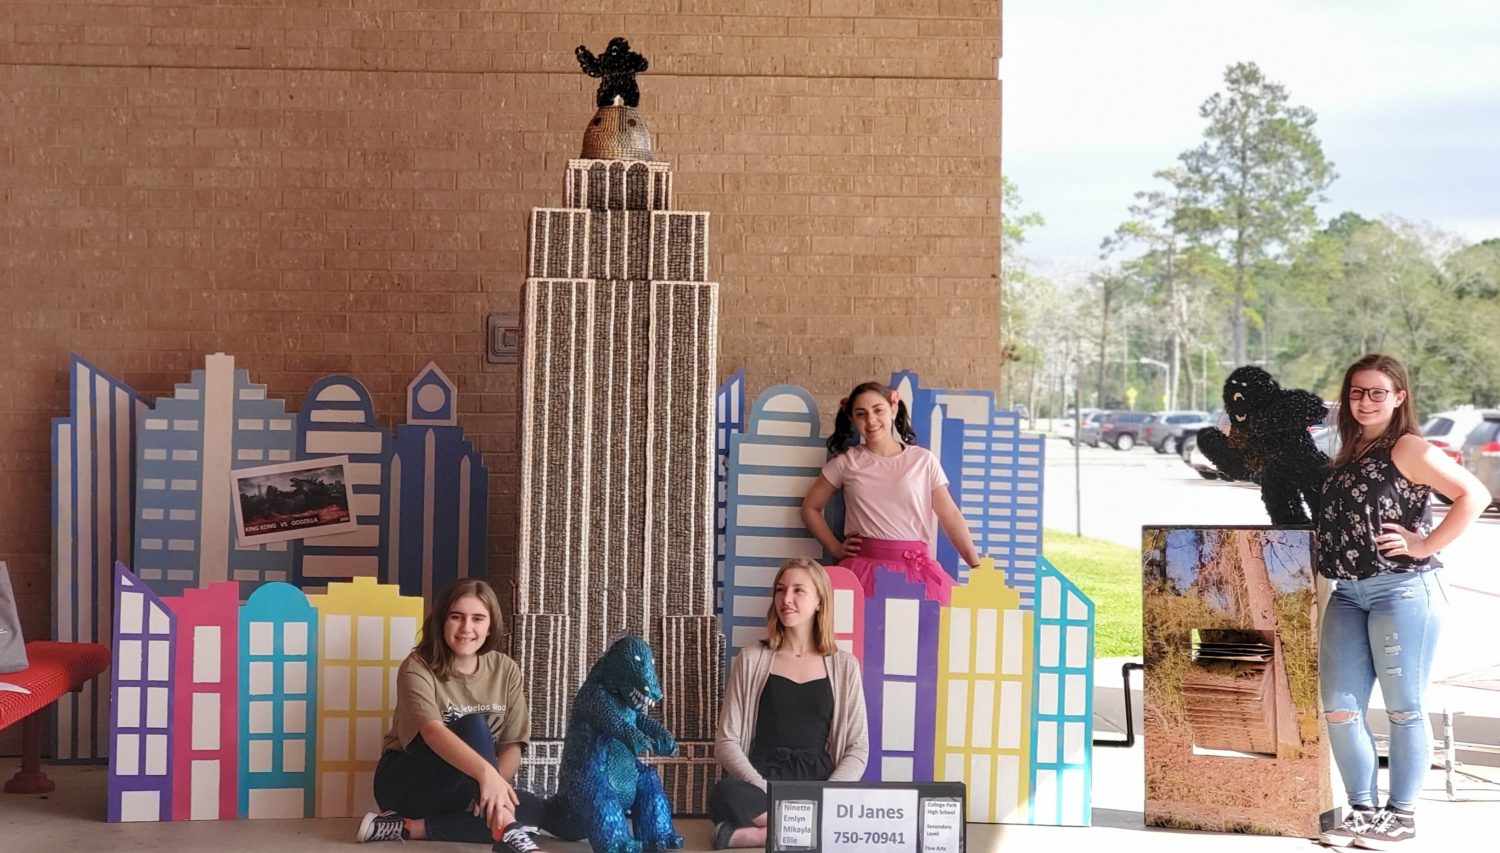 "students pose in front of the Empire State Building they replicated made out of shelled sunflower seeds"